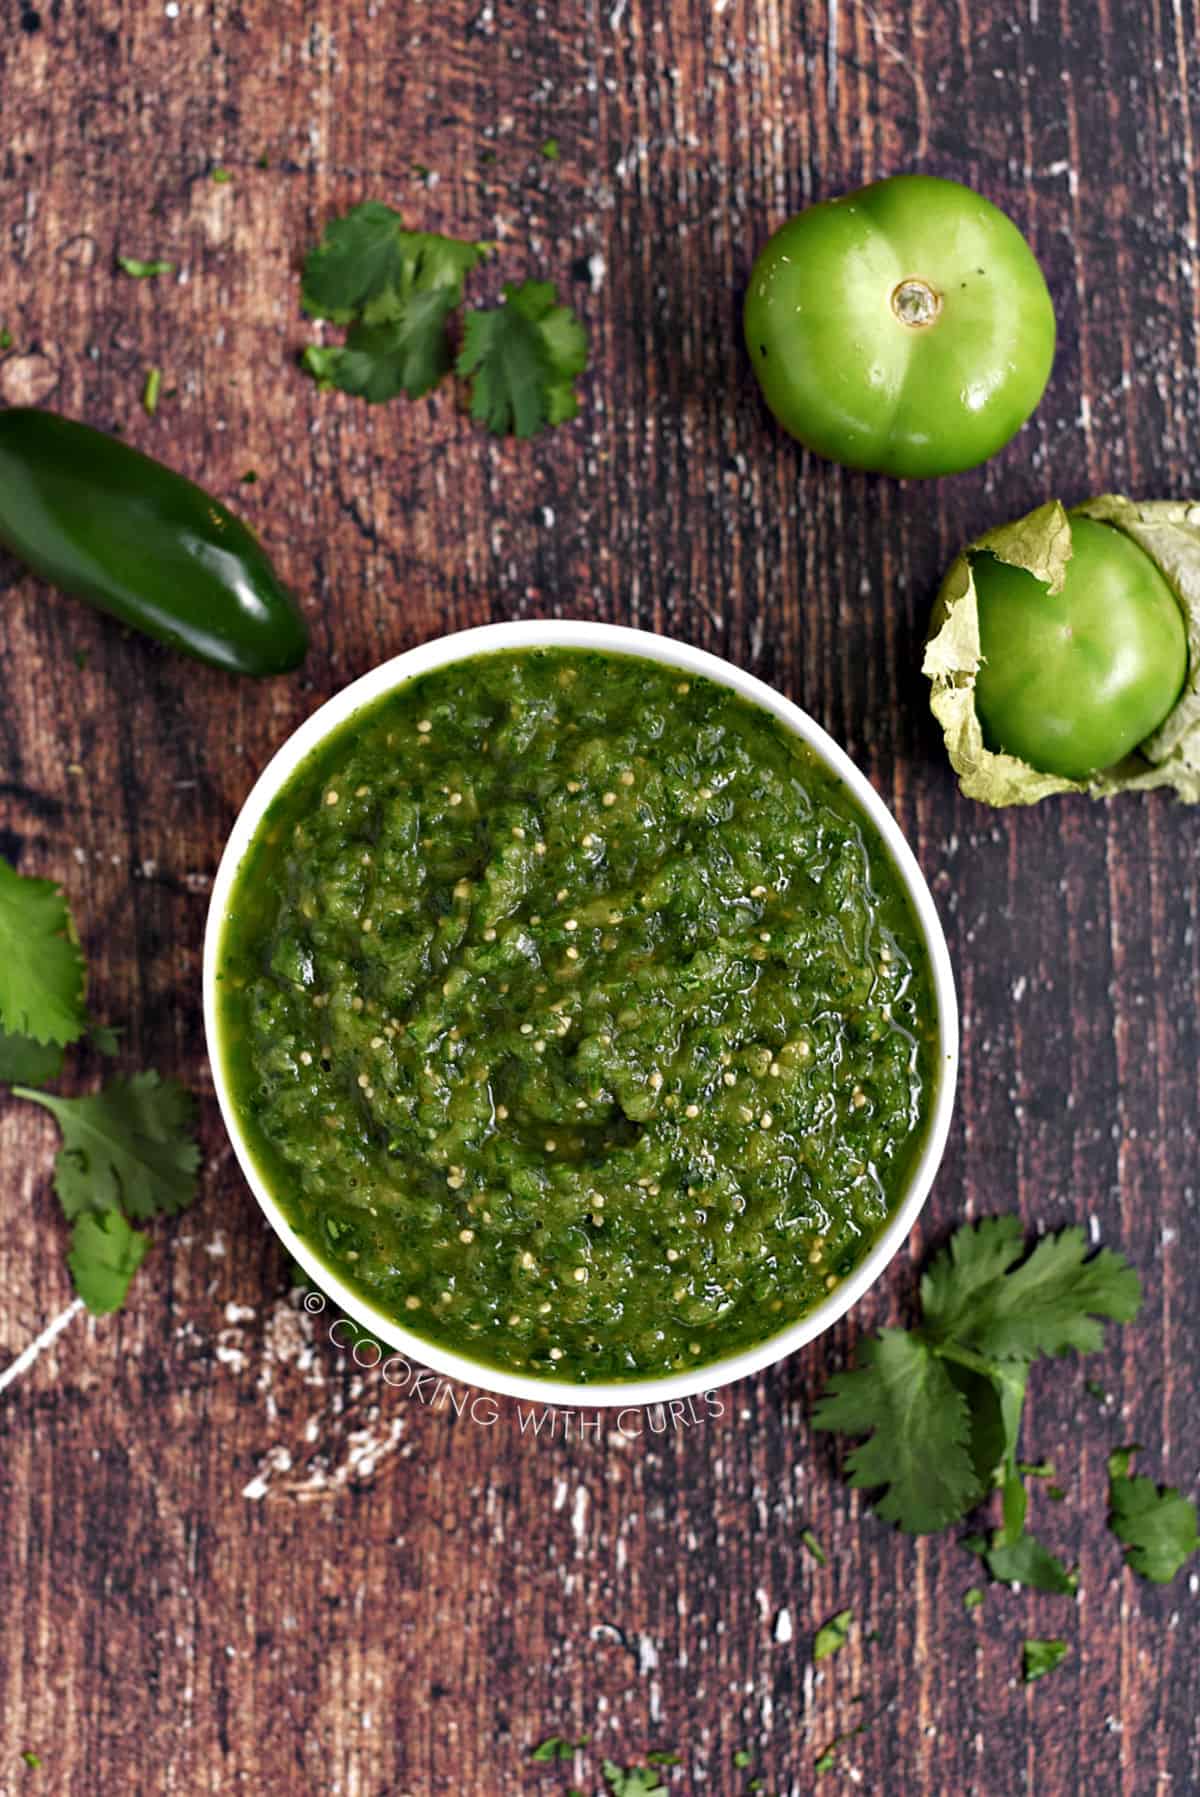 Looking down on a white bowl filled with green salsa verde surrounded by tomatillos, jalapeno pepper and cilantro leaves.